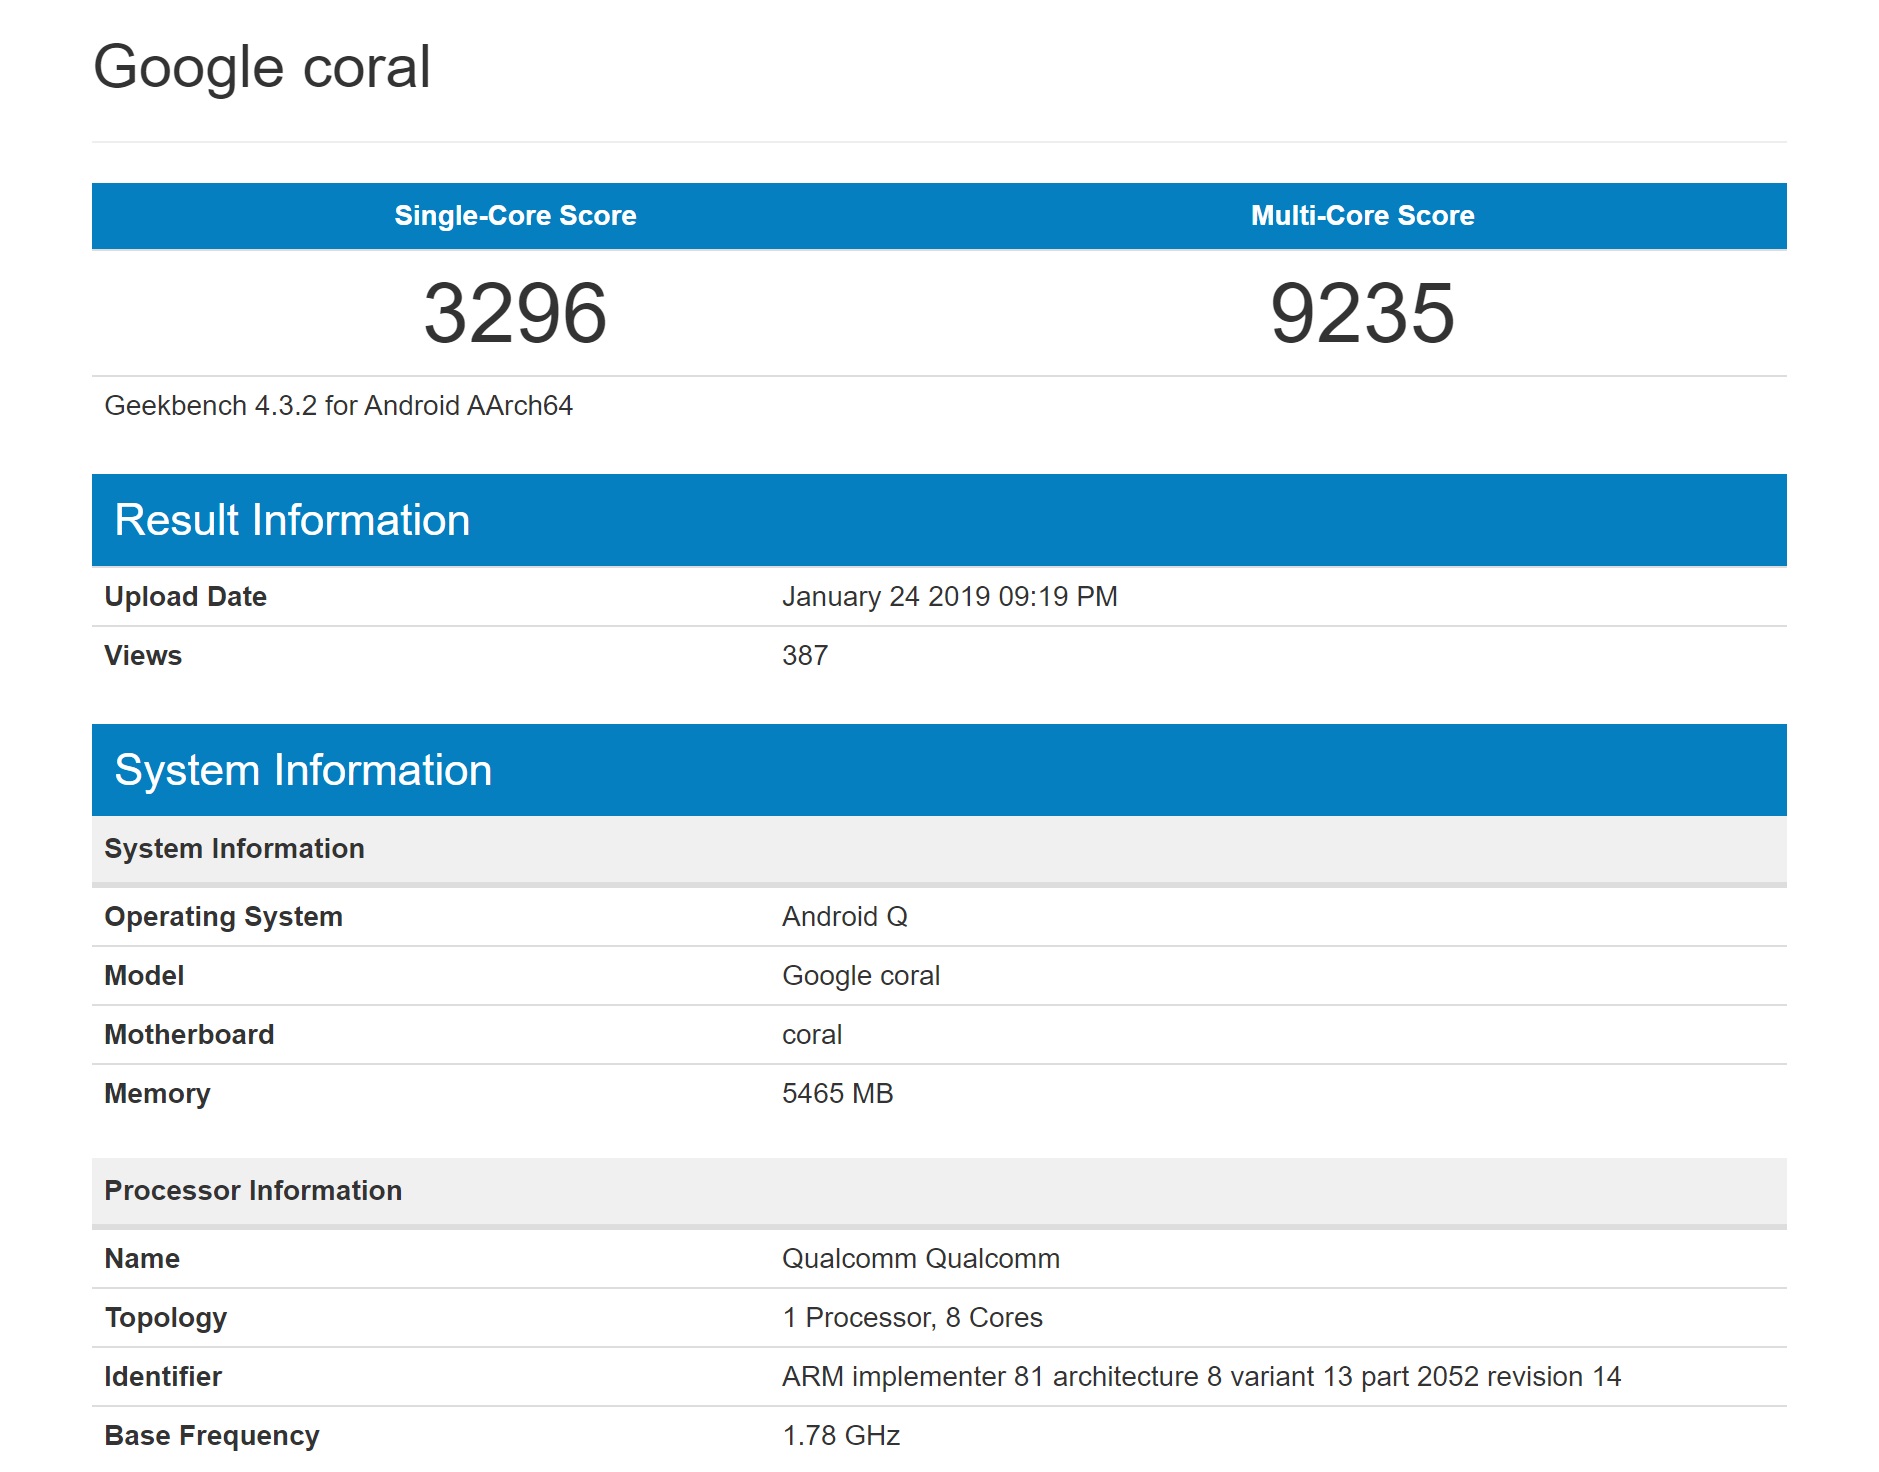 Geekbench results for the Google Coral.